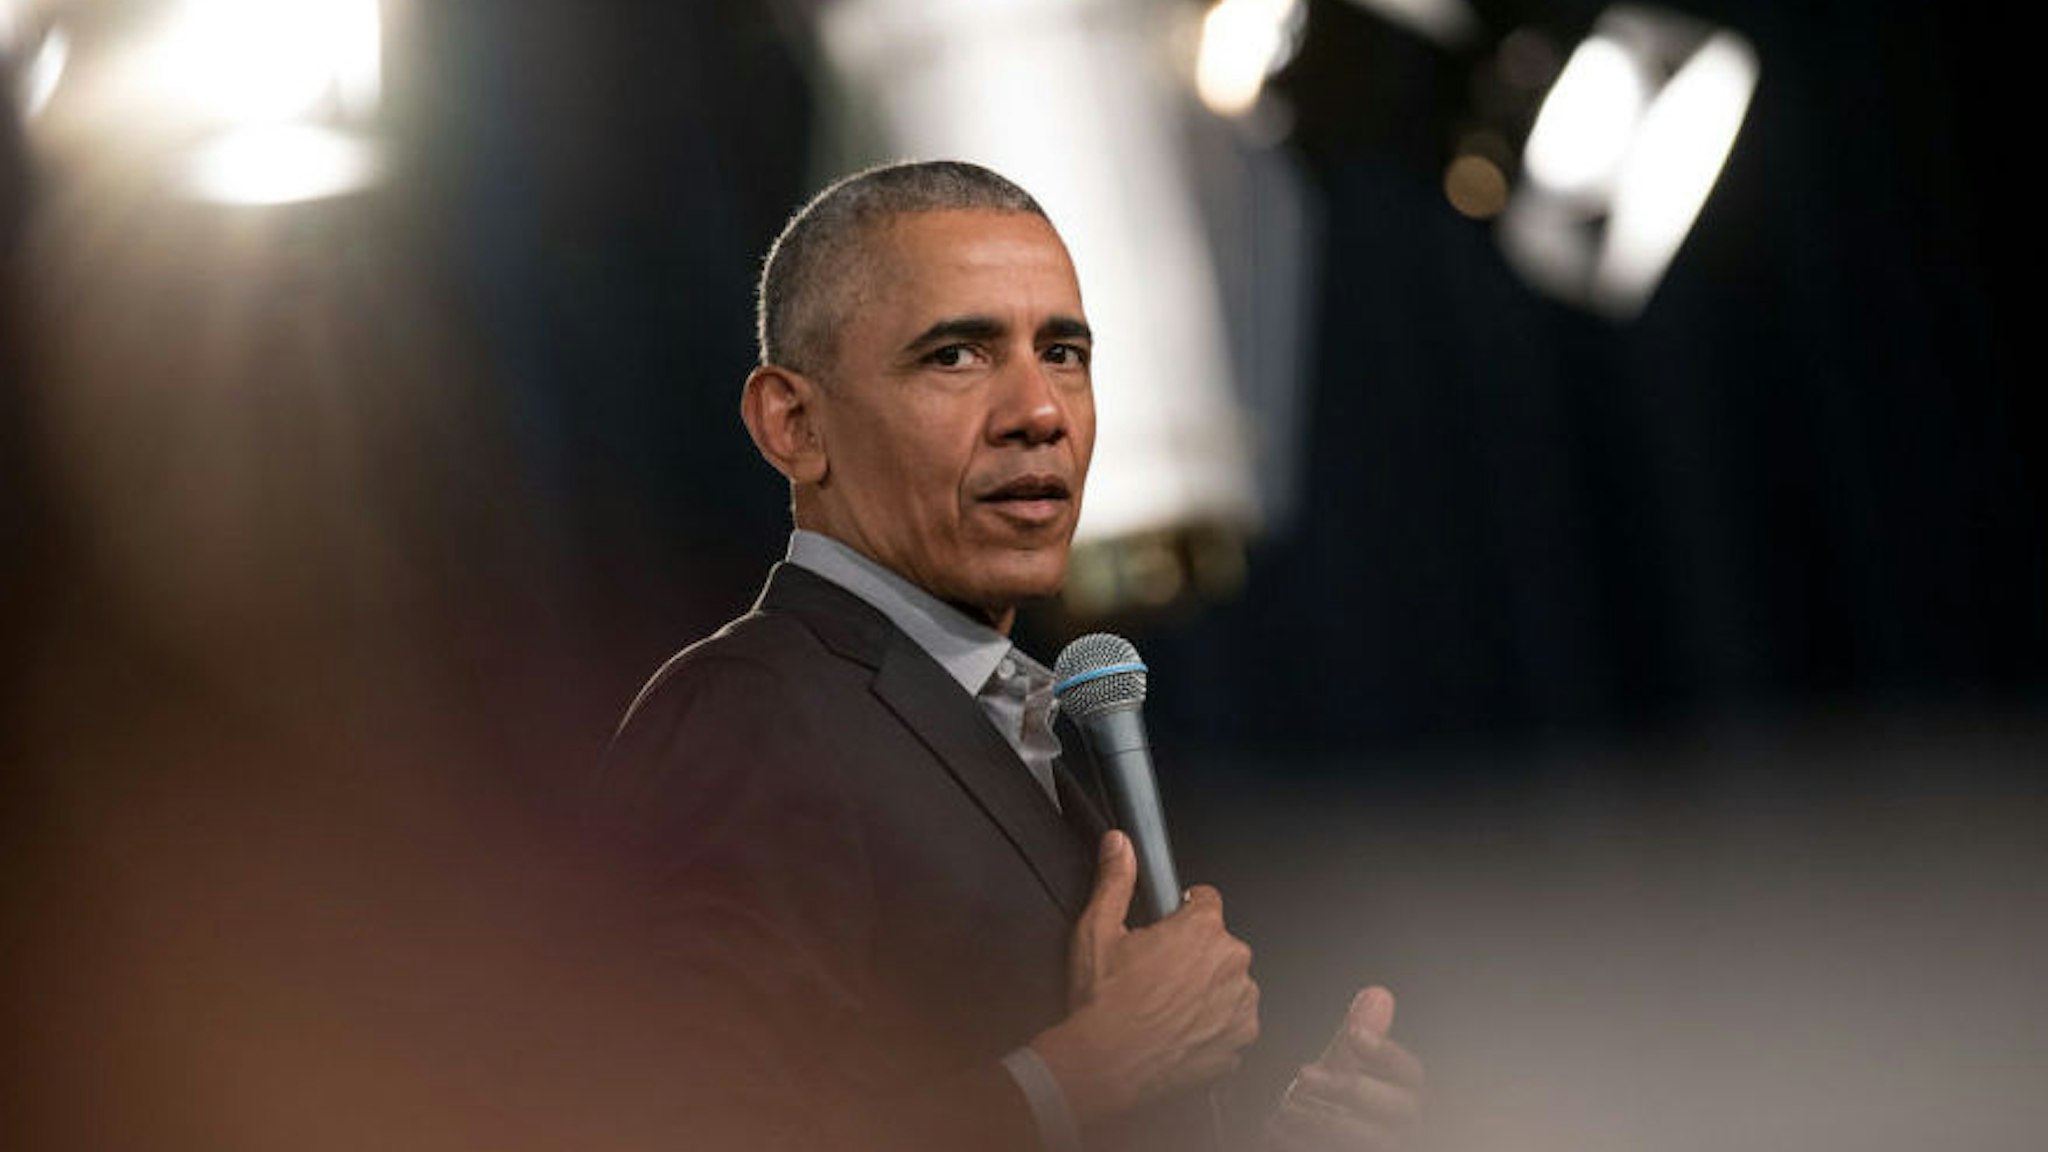 Former US President Barack Obama addresses questions from young people at a Town Hall event at the European School of Management and Technology.